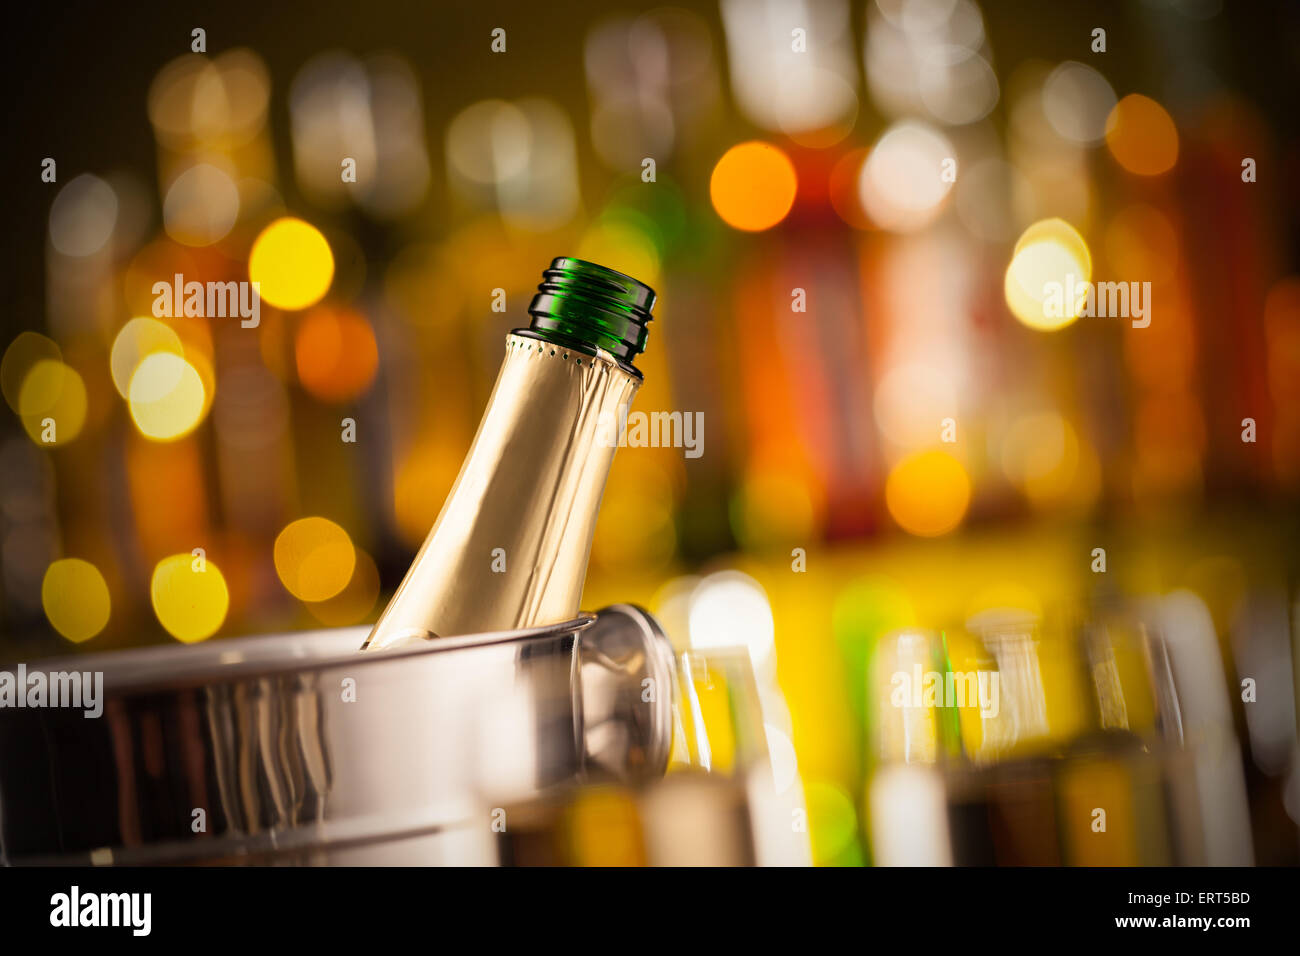 Concept of celebration. Opened bottle of champagne in metal container Stock Photo